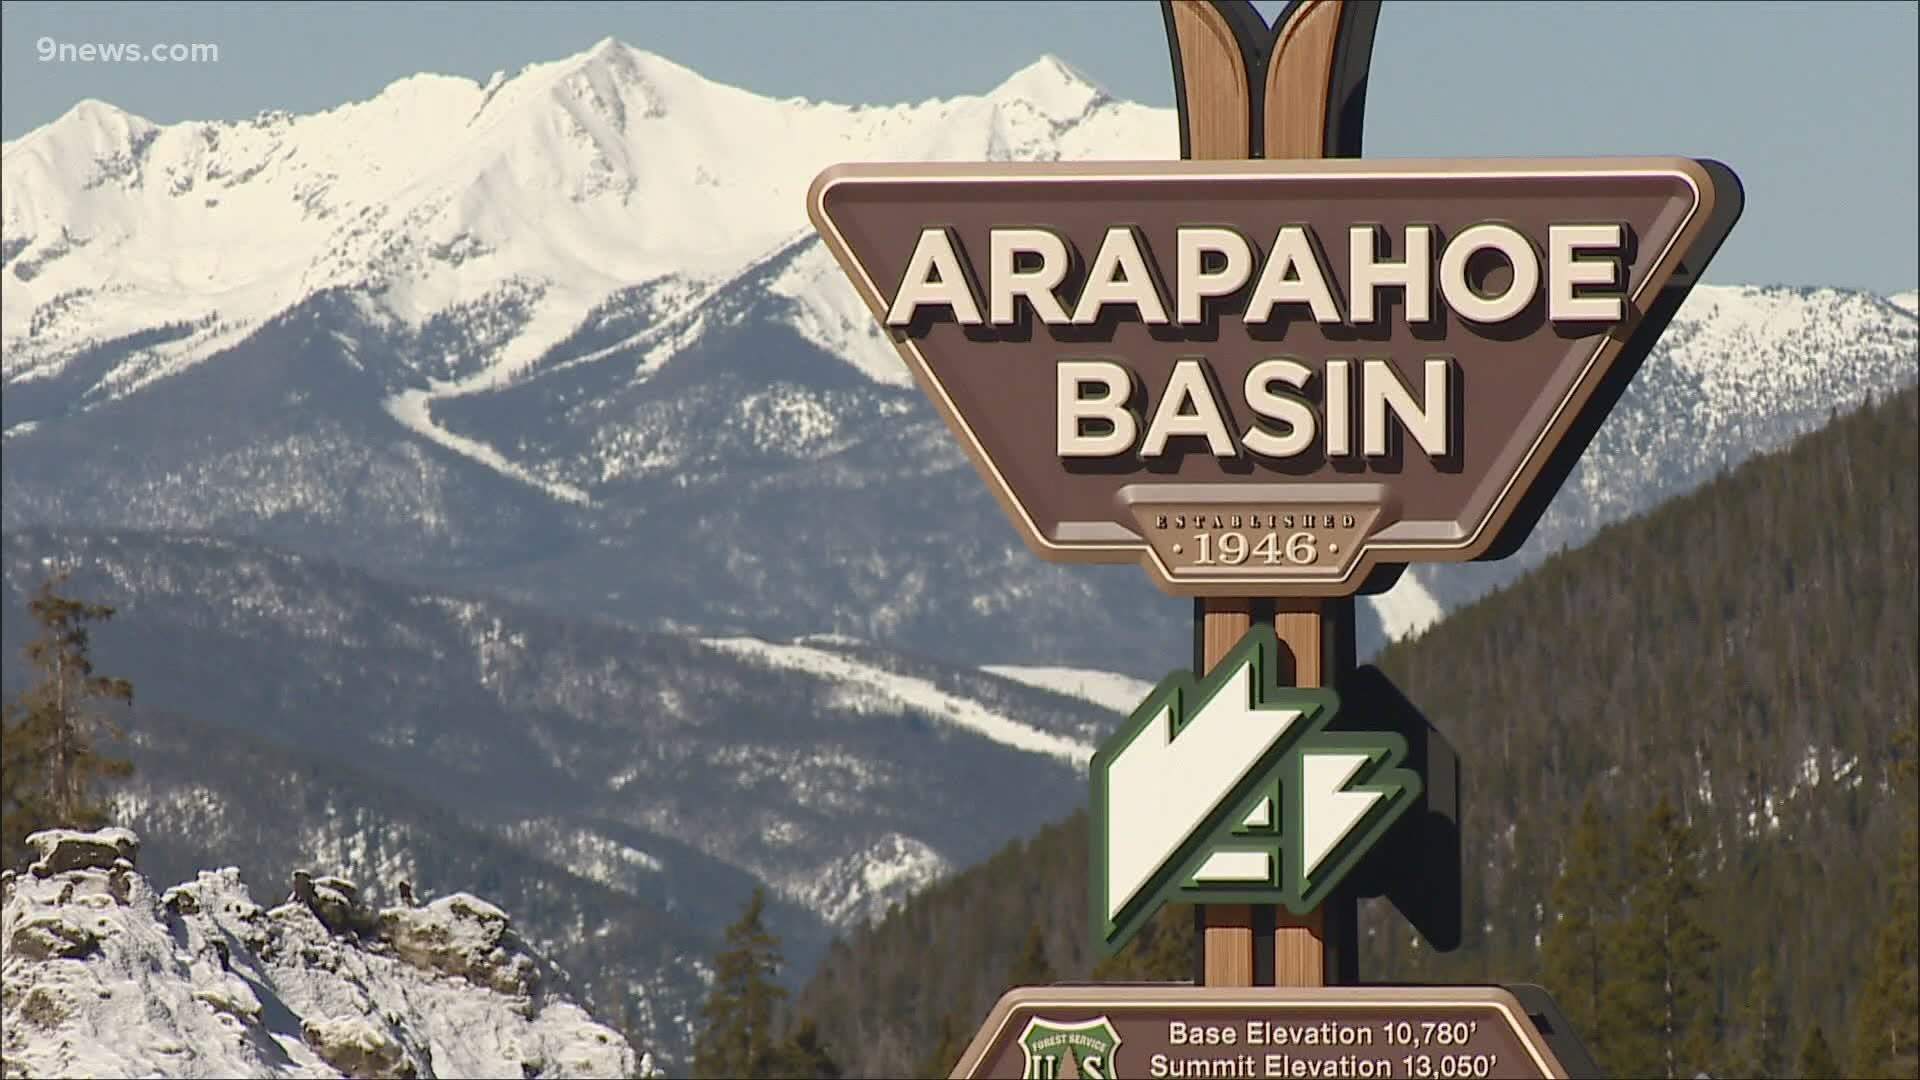 State releases guidelines for restaurants to reopen to in-house dining and A-Basin says it will open on May 27.